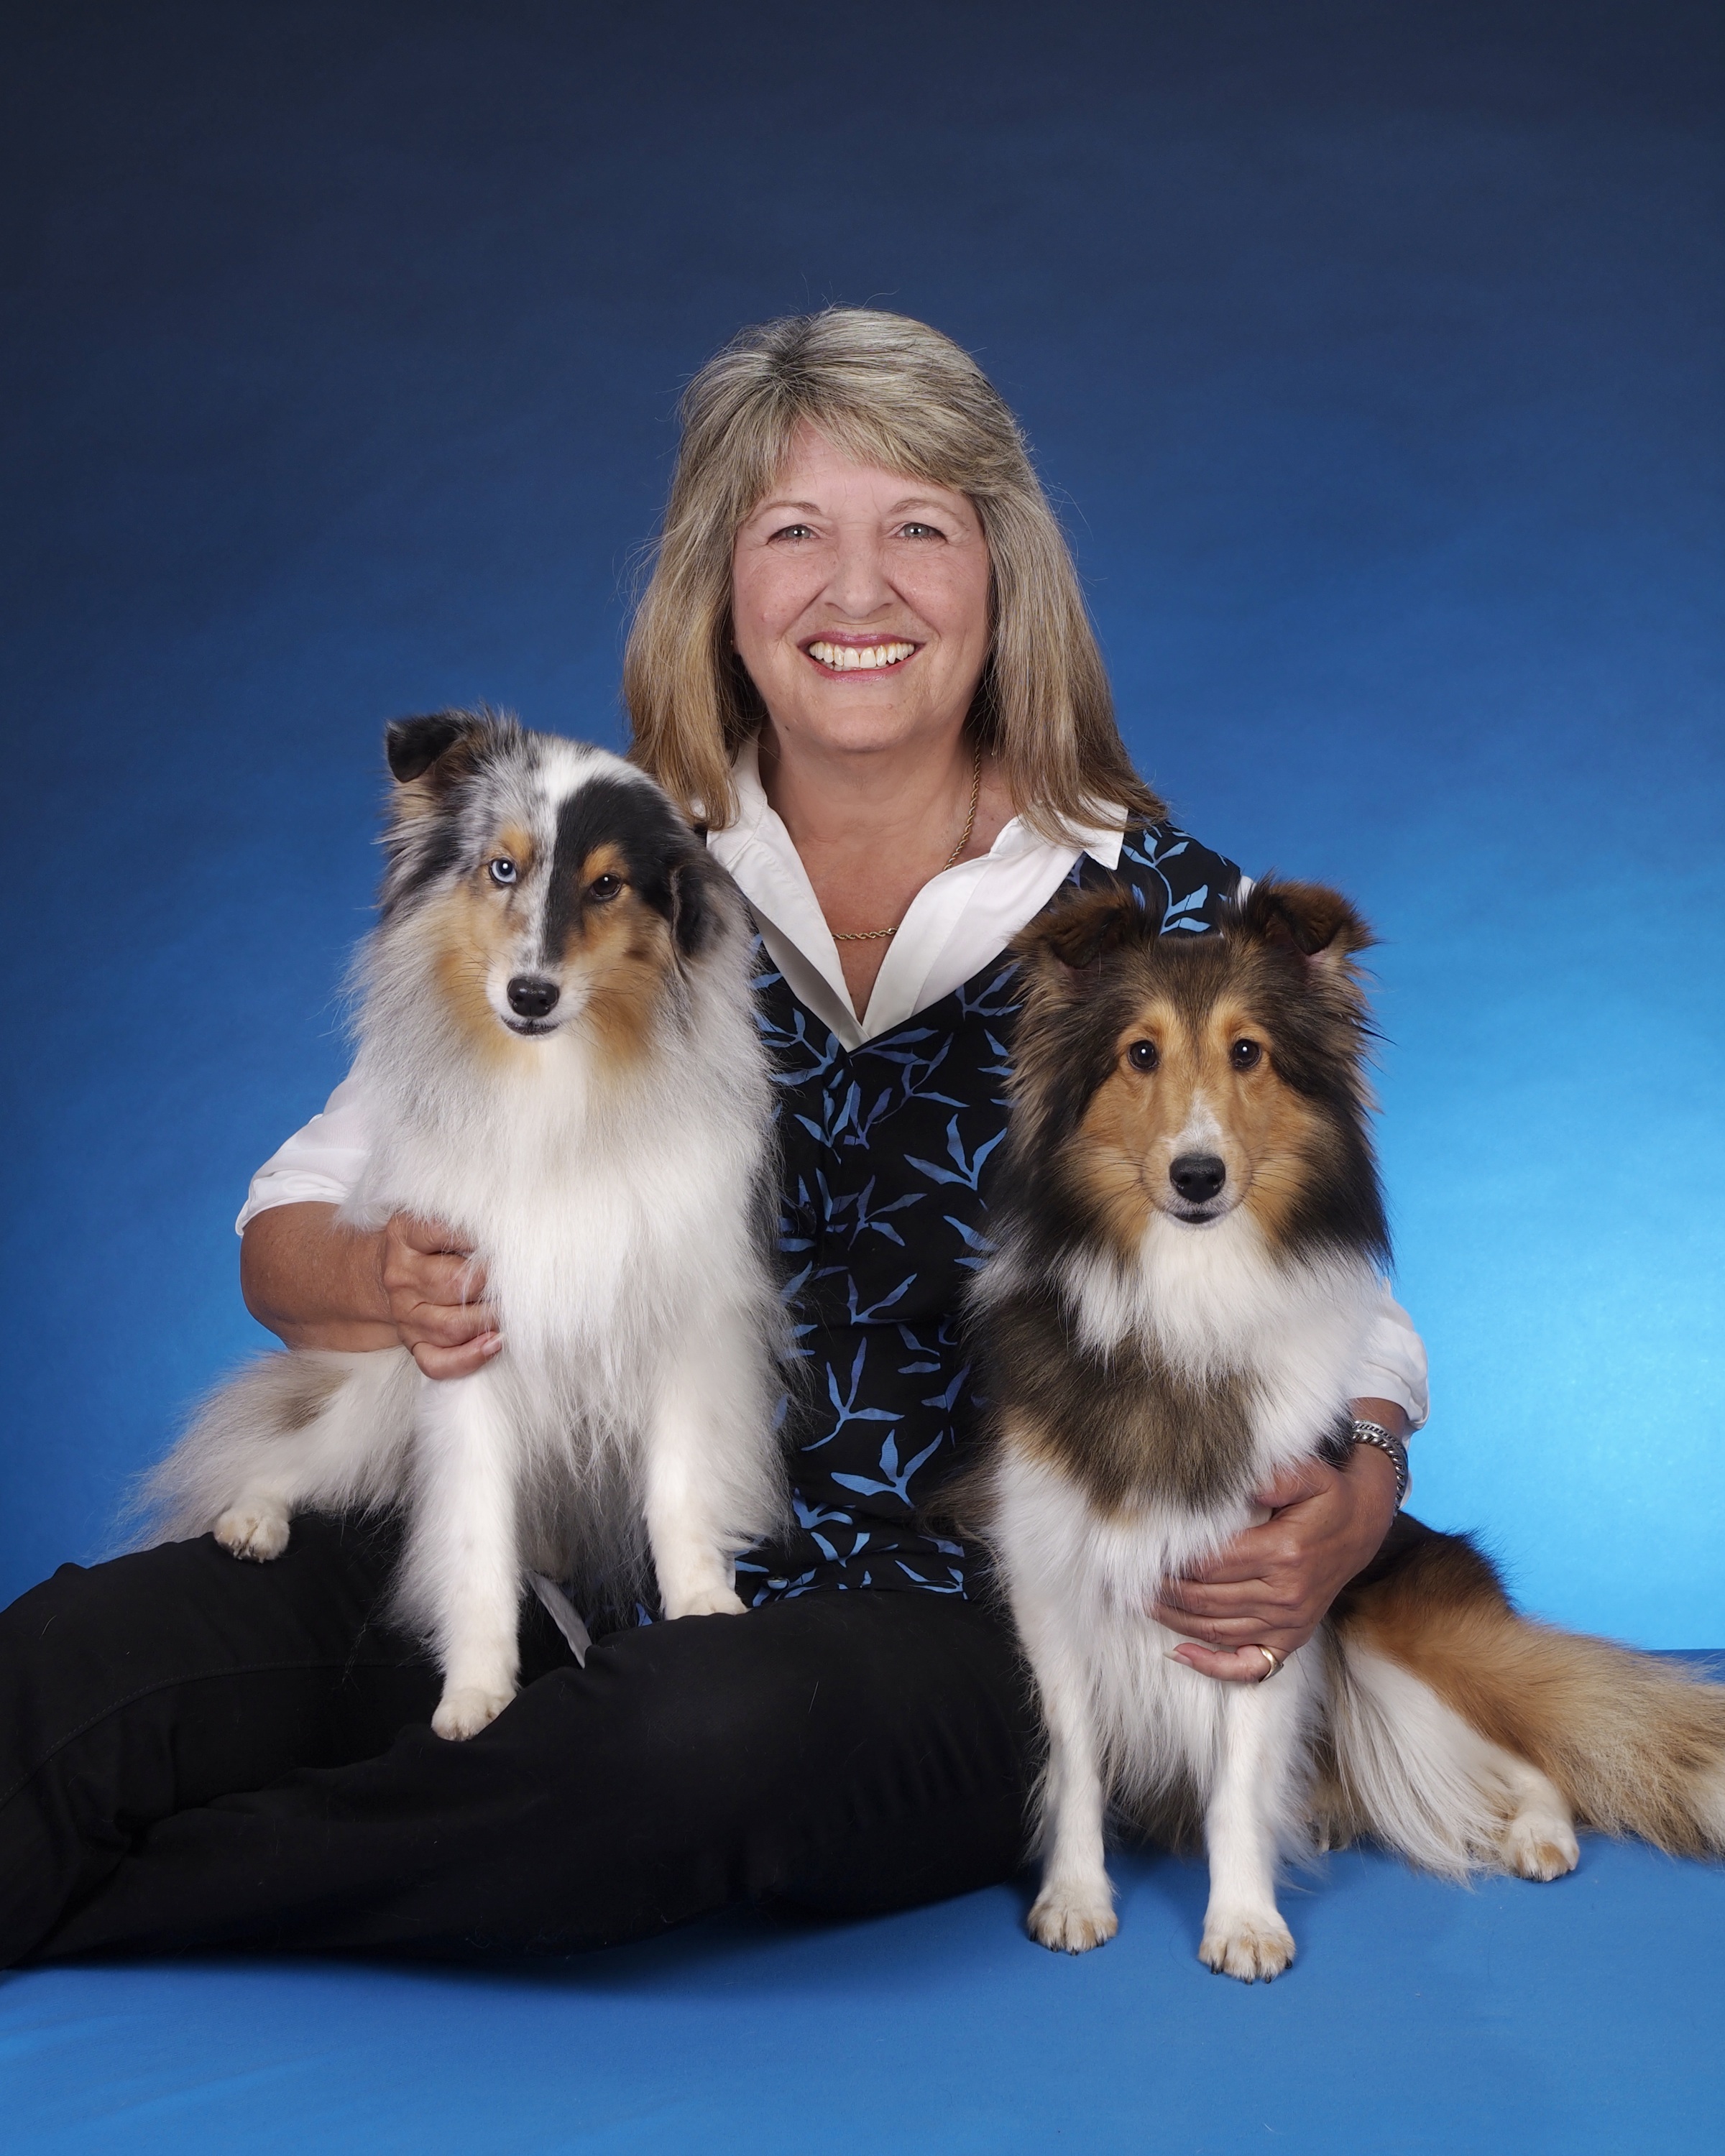 In this interview Pam shares anecdotes about her own dogs.